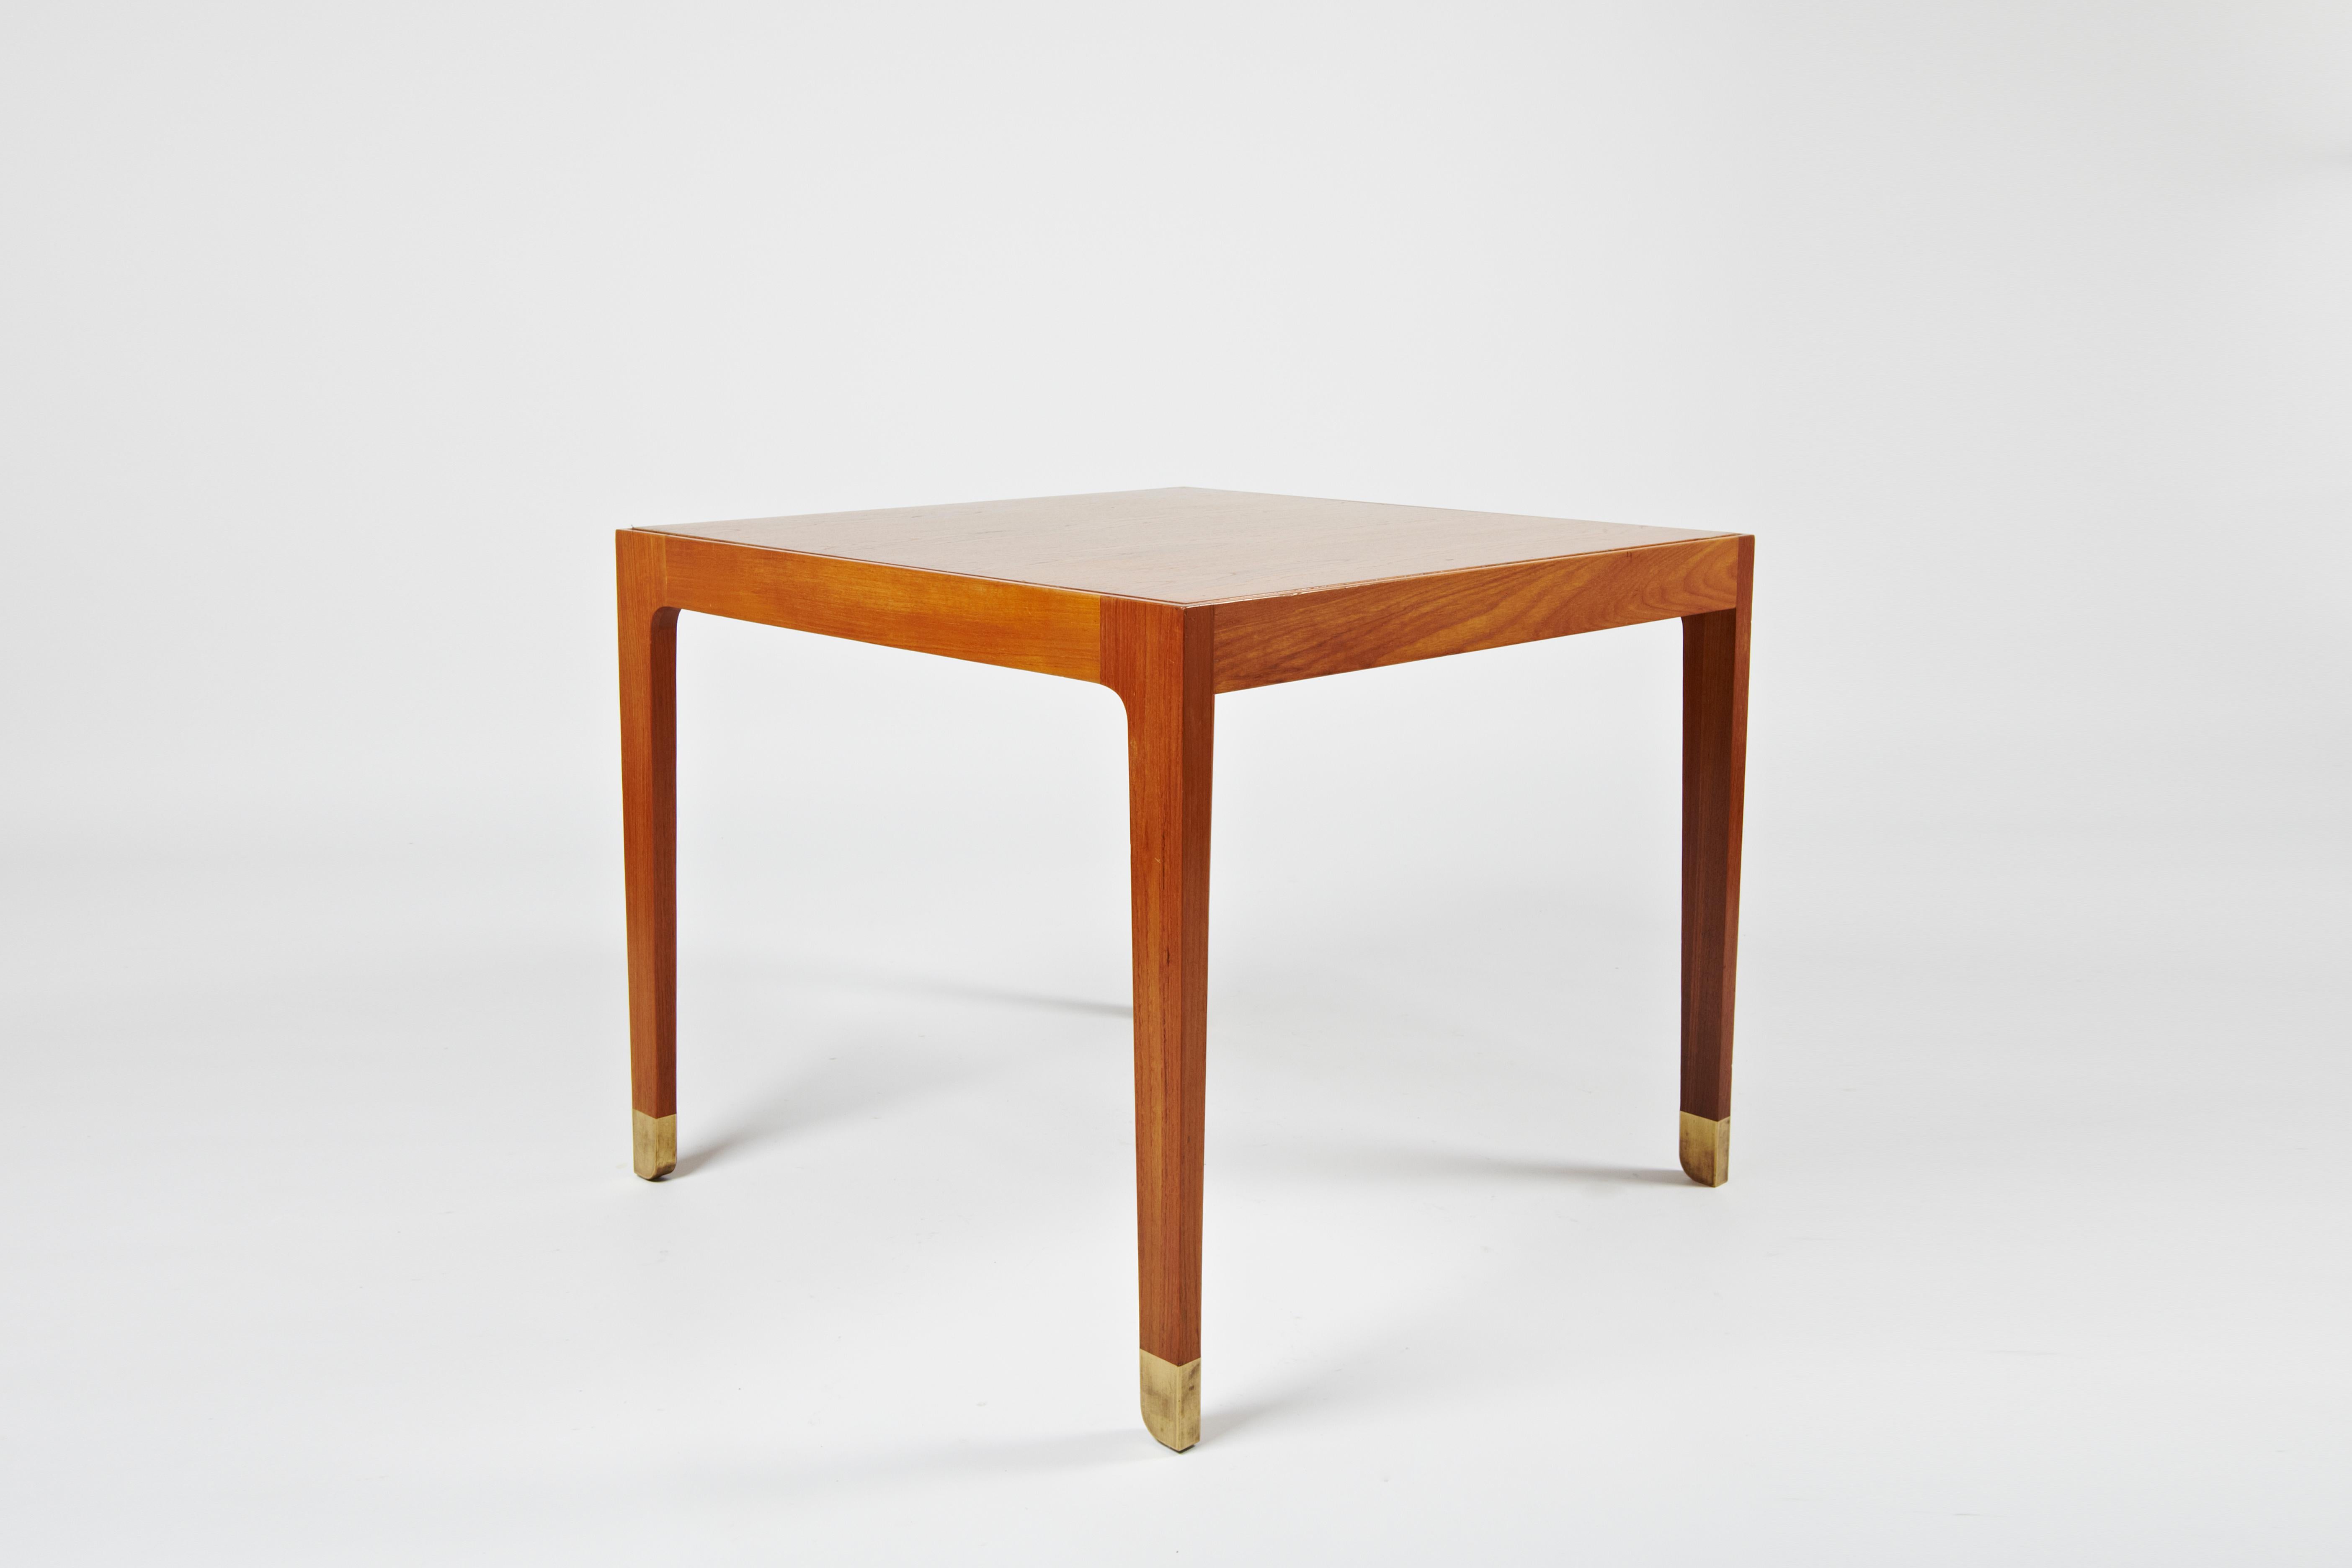 Finn Juhl:  Exhibition tables made 1947 - for dining or cards - single or pair In Good Condition For Sale In London, GB